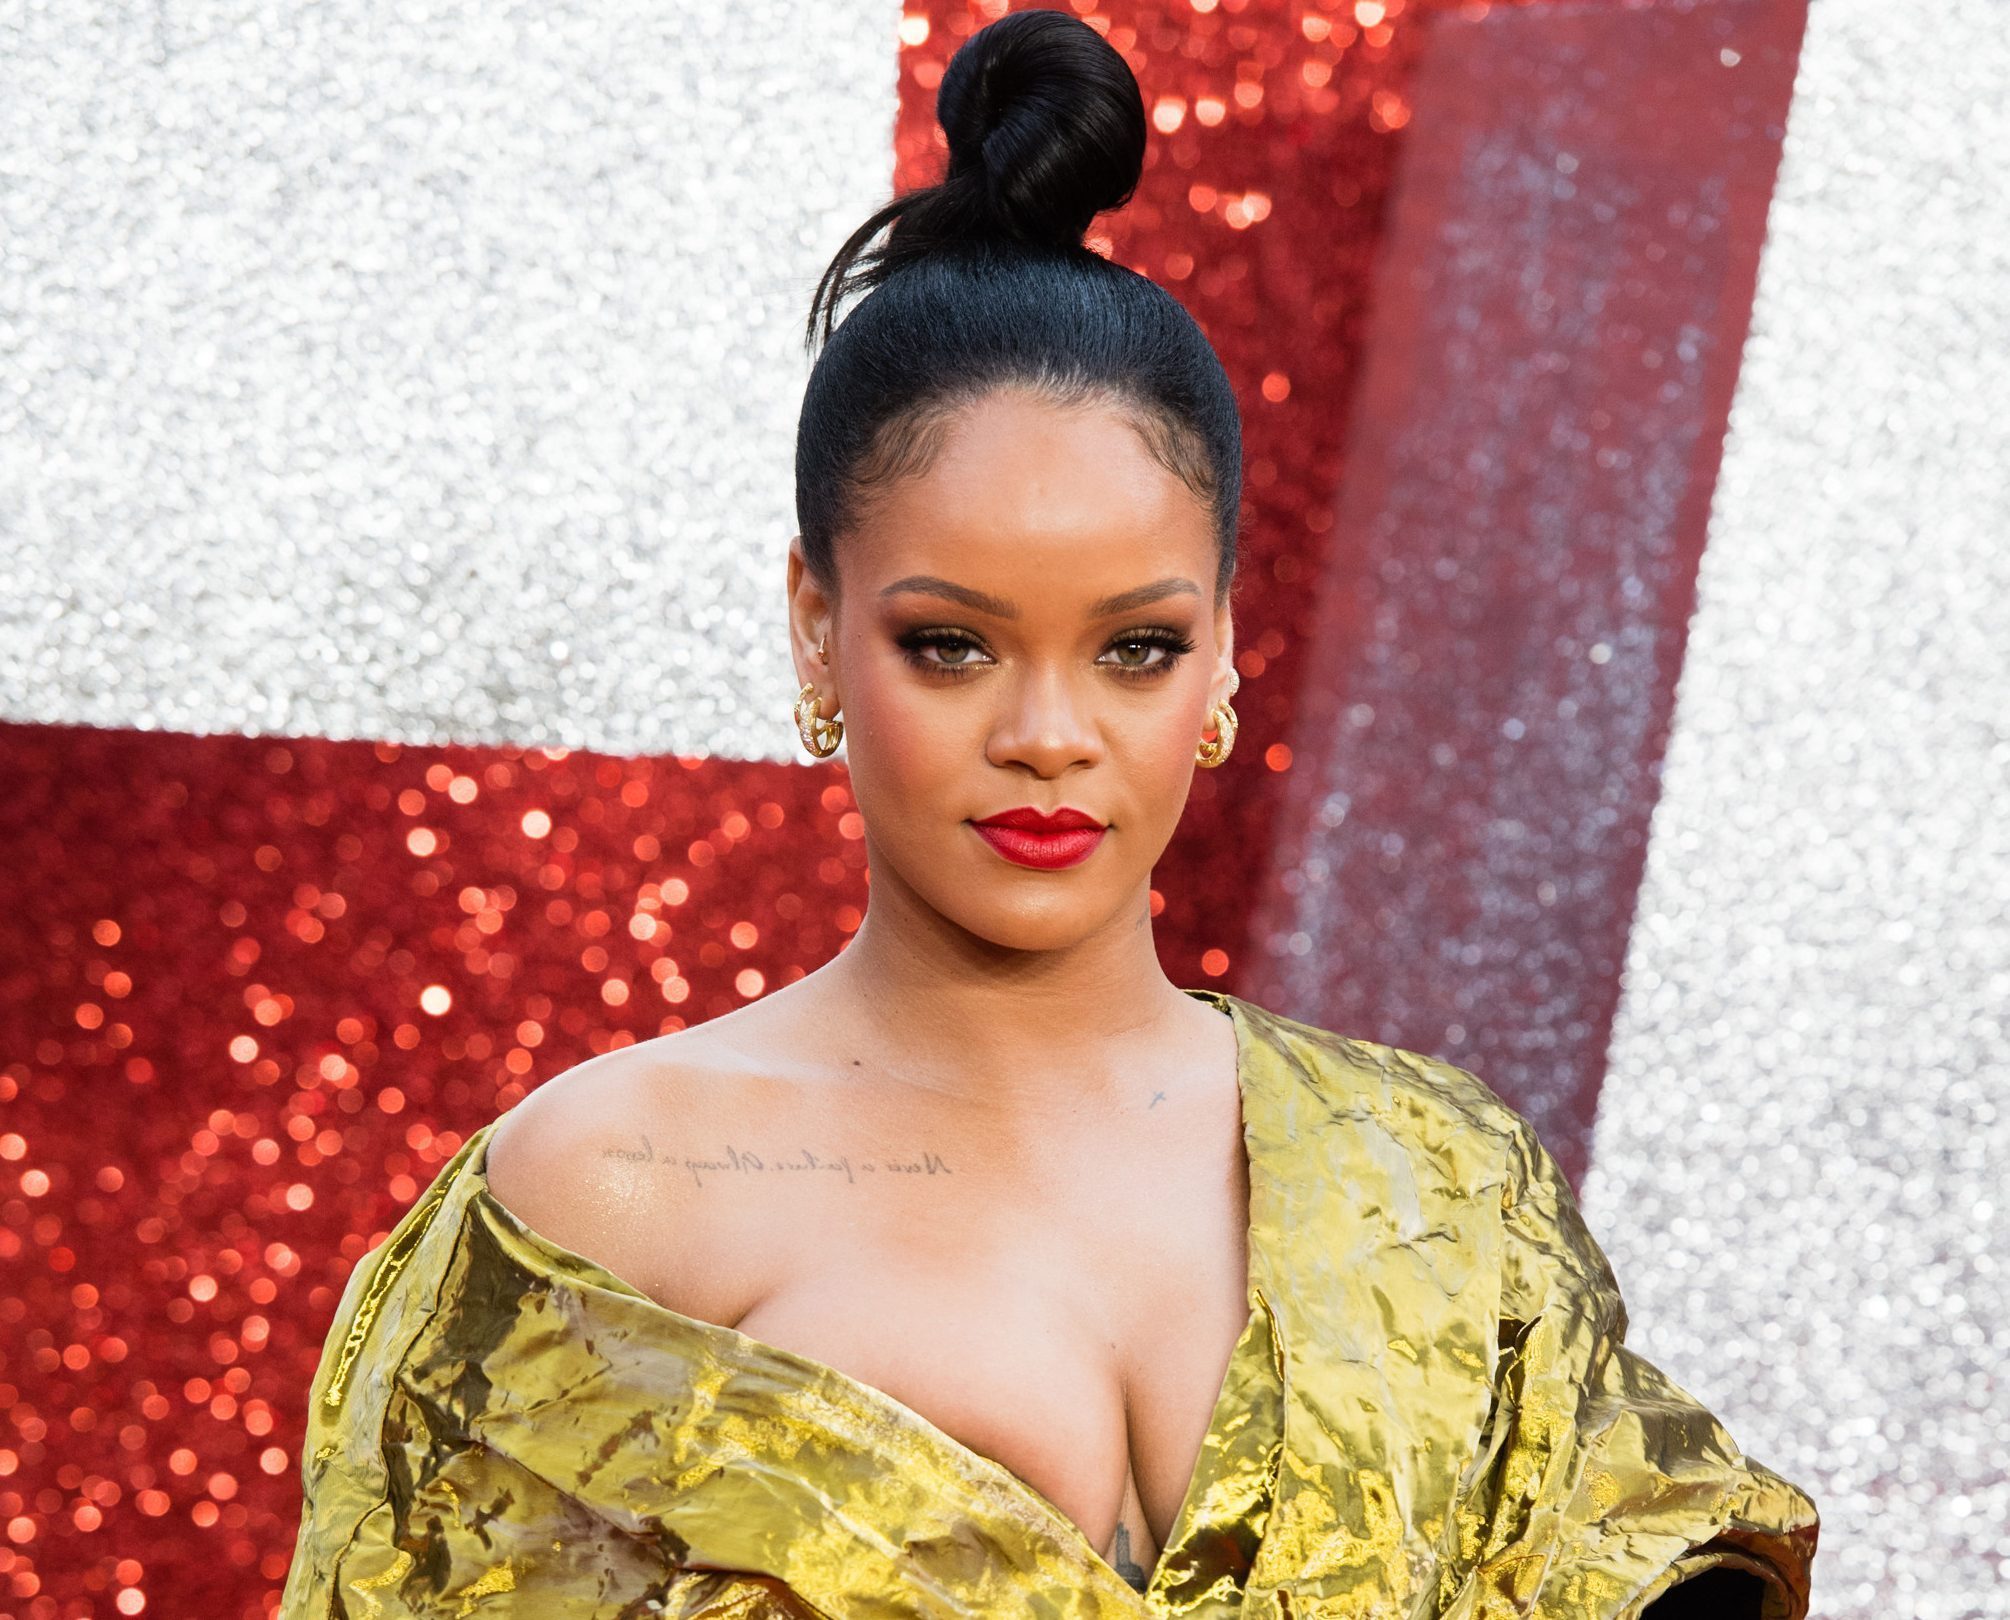 Rihanna Teases First Look At 'Fenty' Luxury Fashion Line